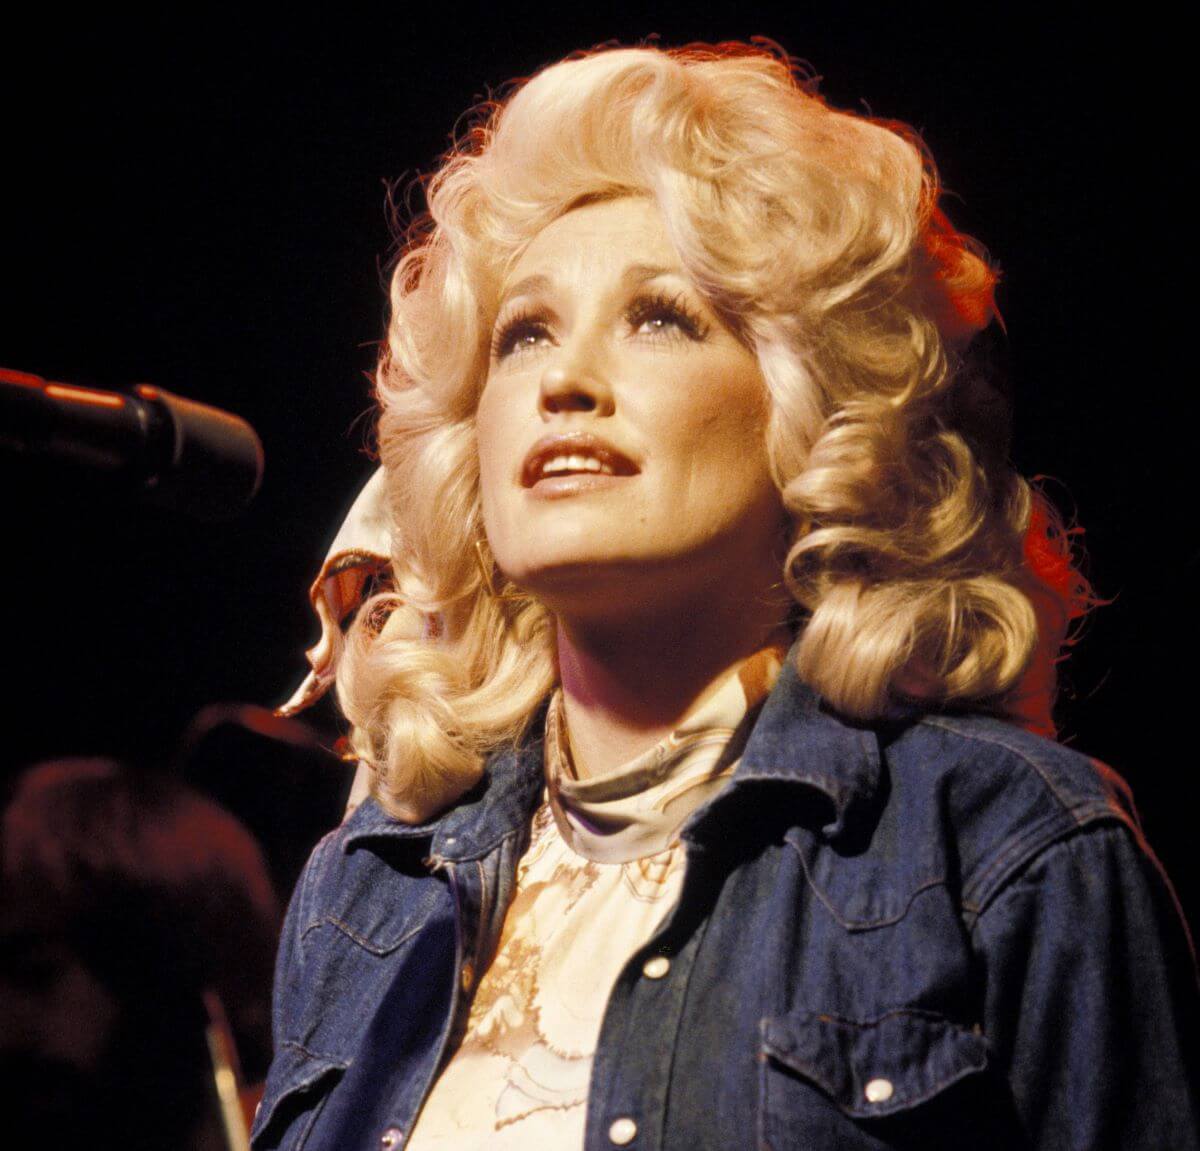 Dolly Parton wears a denim shirt and sits in front of a microphone. She looks up.